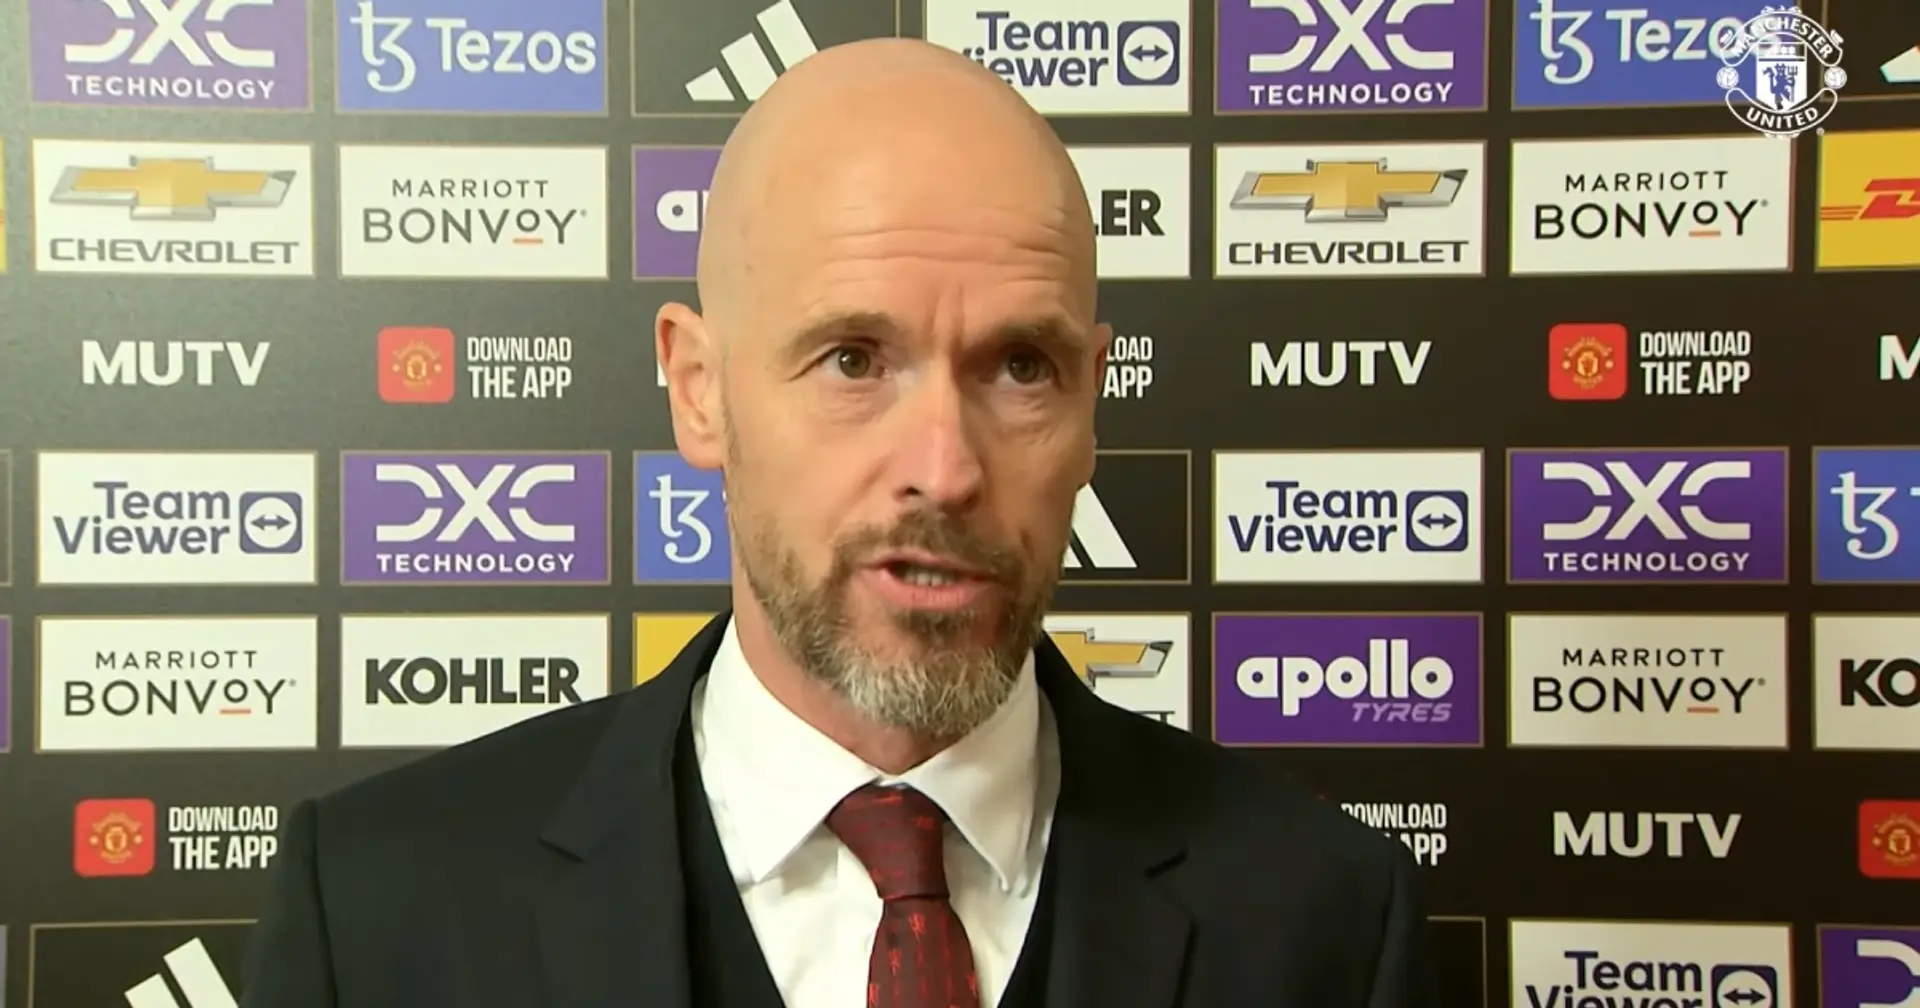 Bad news for defenders but hope for Mason Mount: Ten Hag provides Man United injury update